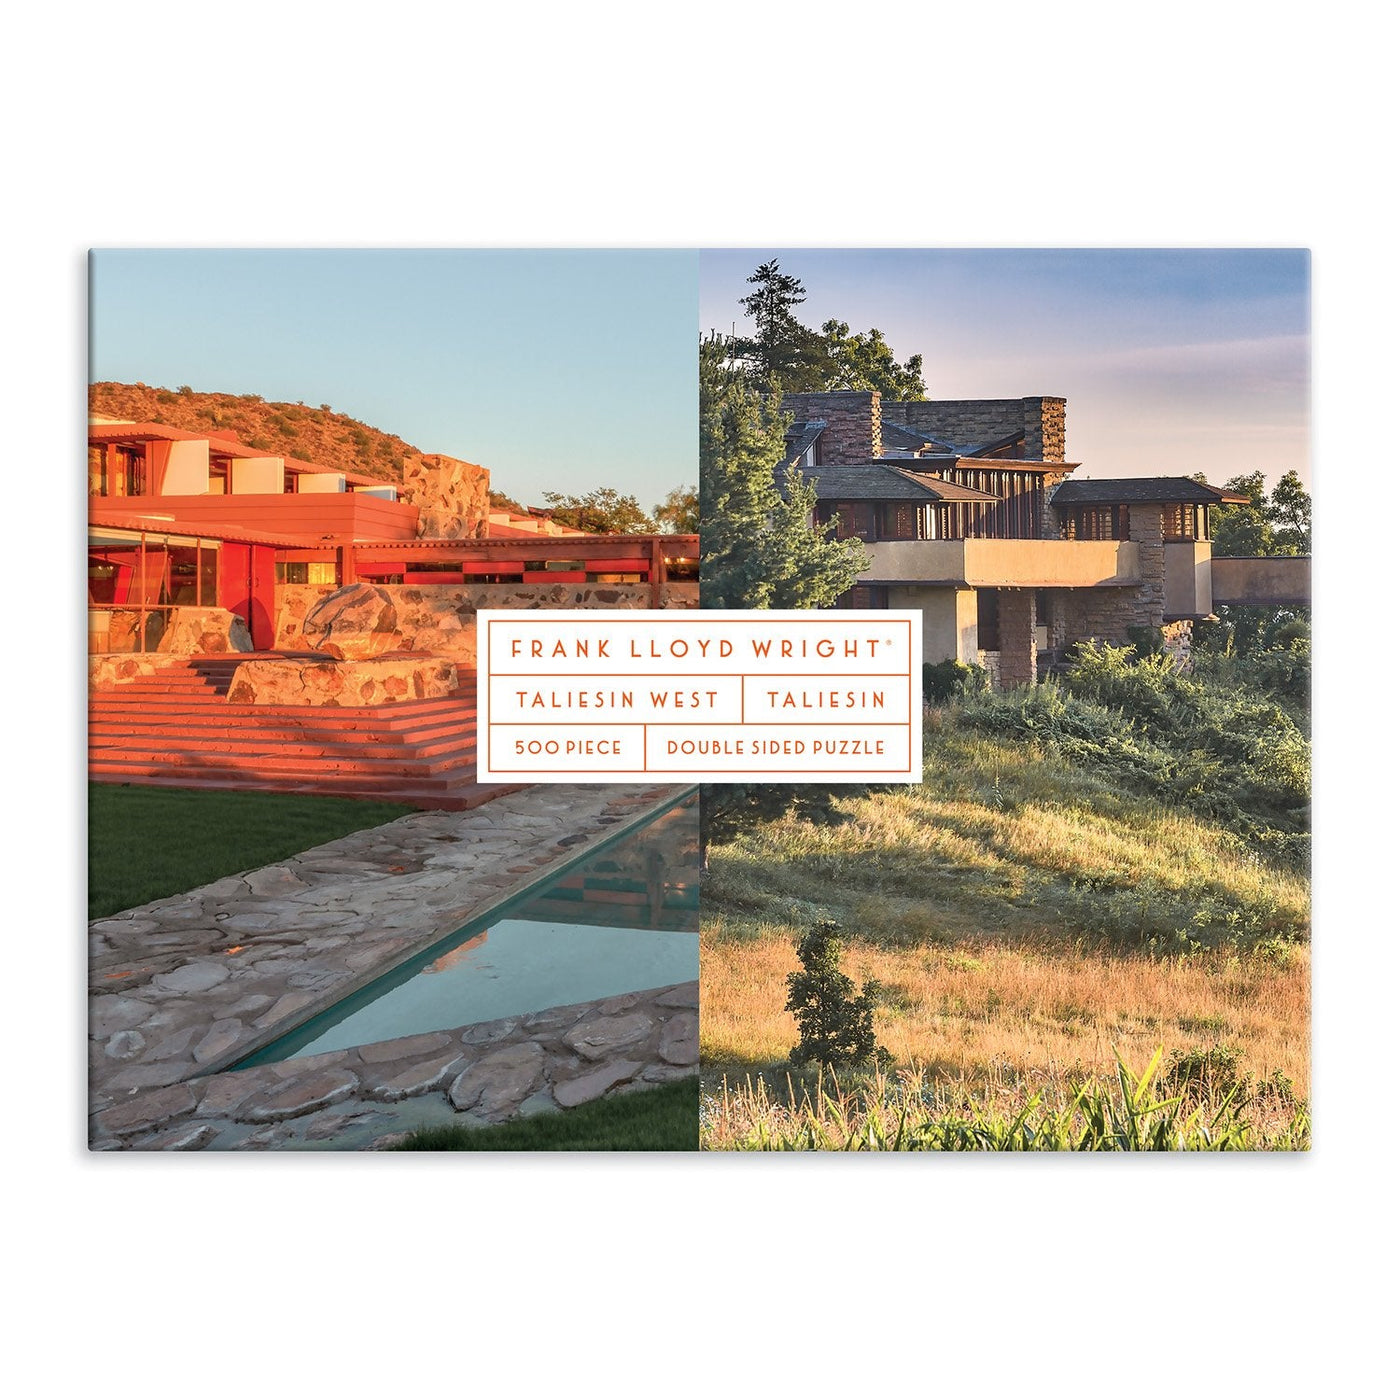 Frank Lloyd Wright: Taliesin and Taliesin West 500 Piece Double-Sided Puzzle